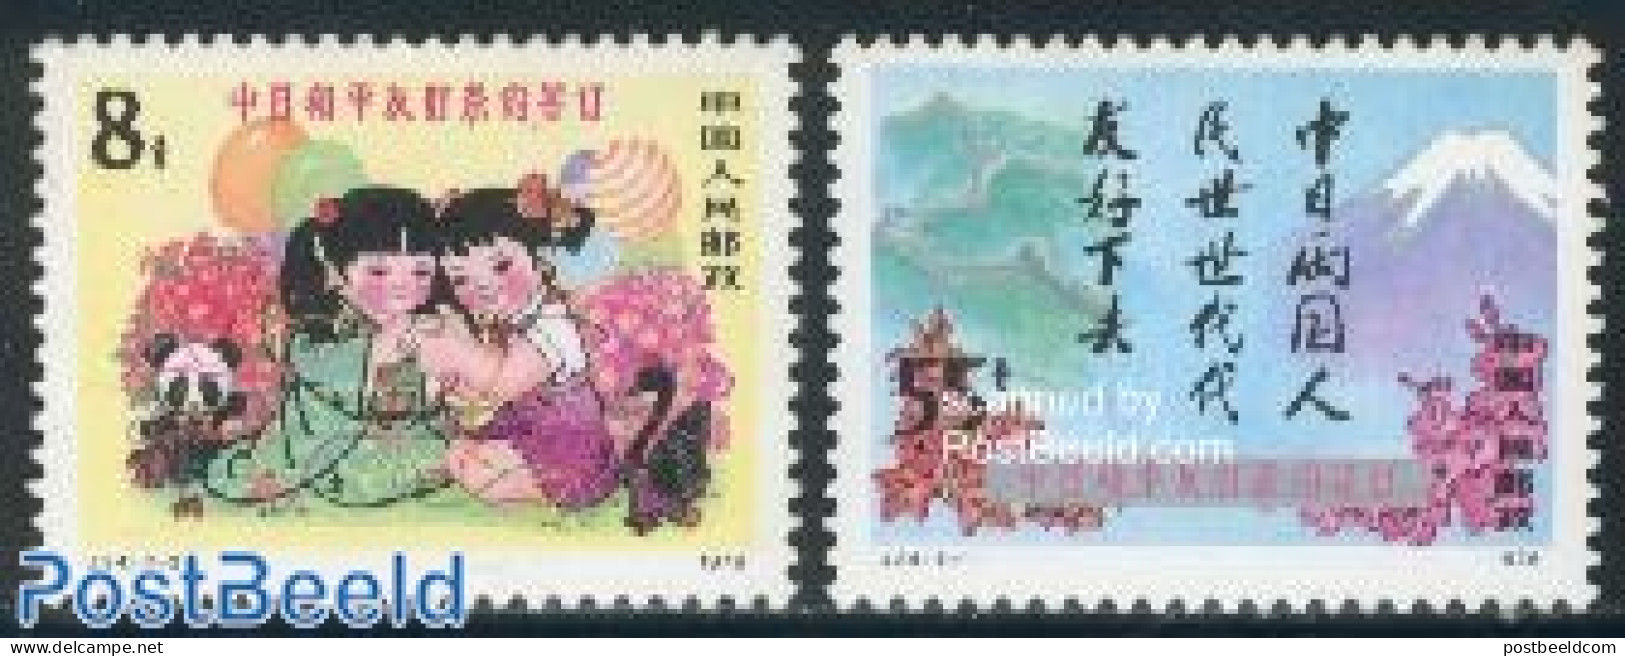 China People’s Republic 1978 Treaty With Japan 2v, Mint NH - Unused Stamps